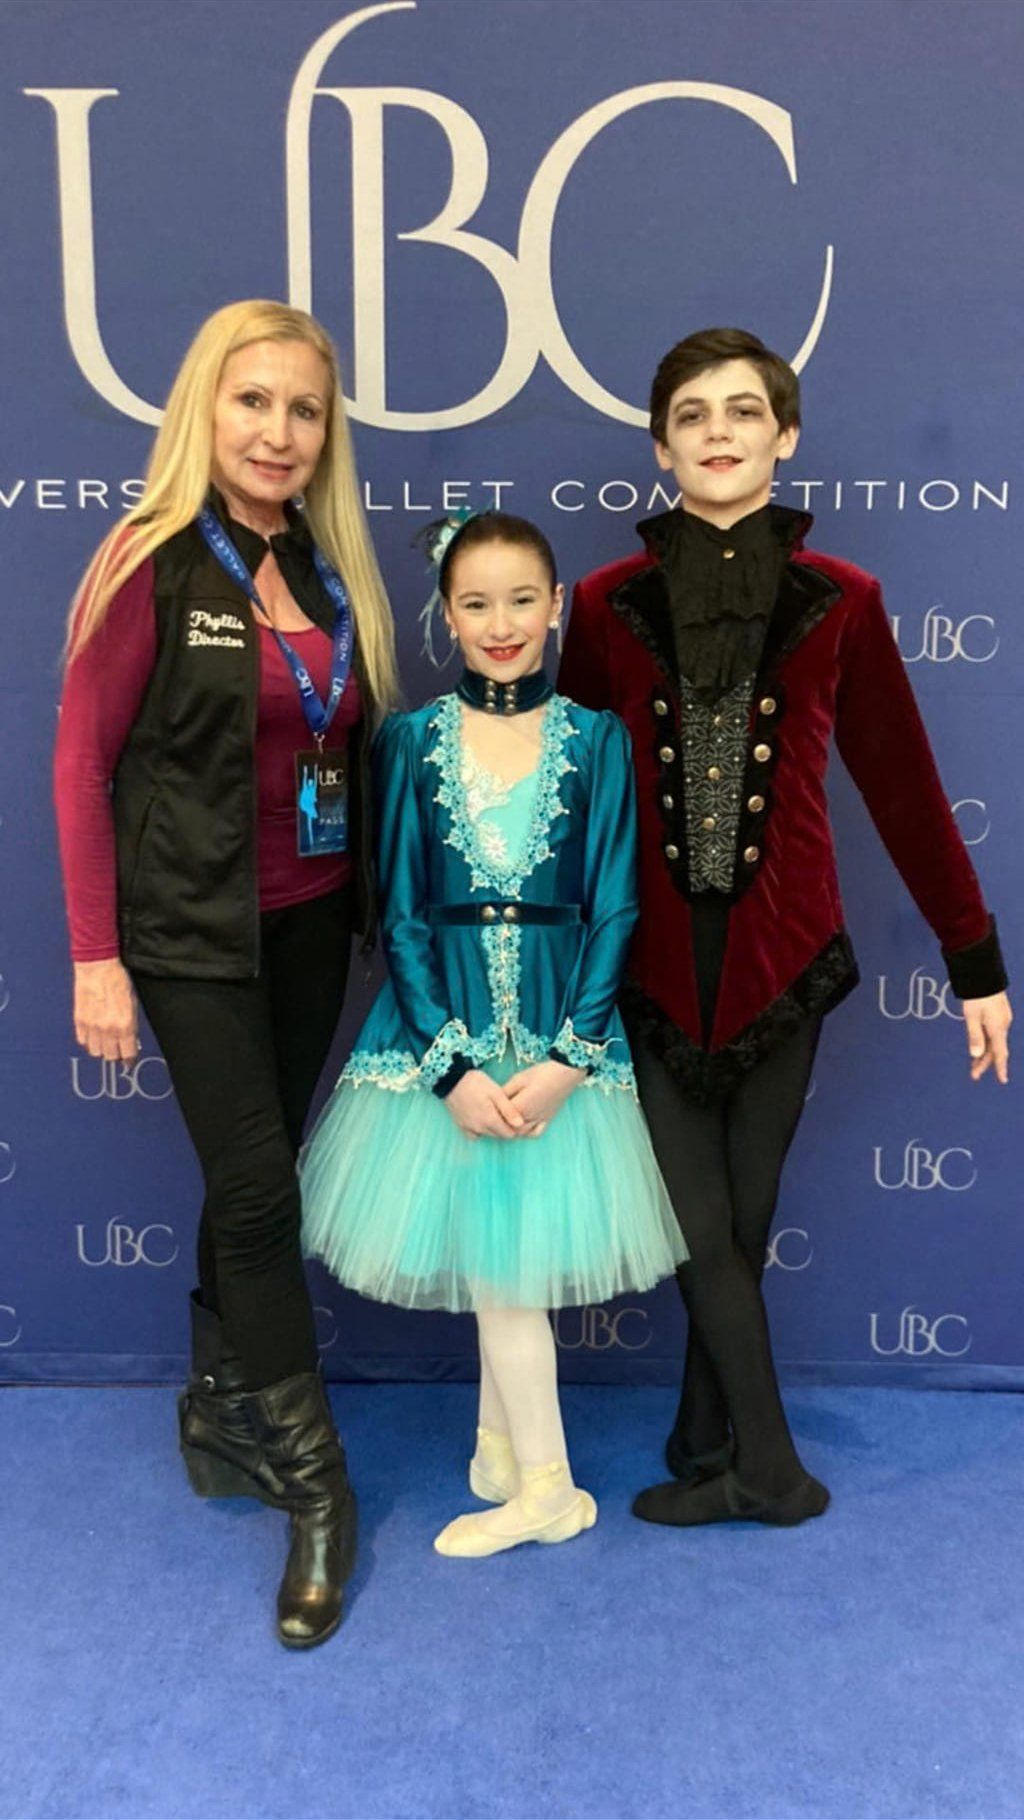 Some students who placed at the Universal Ballet Competition